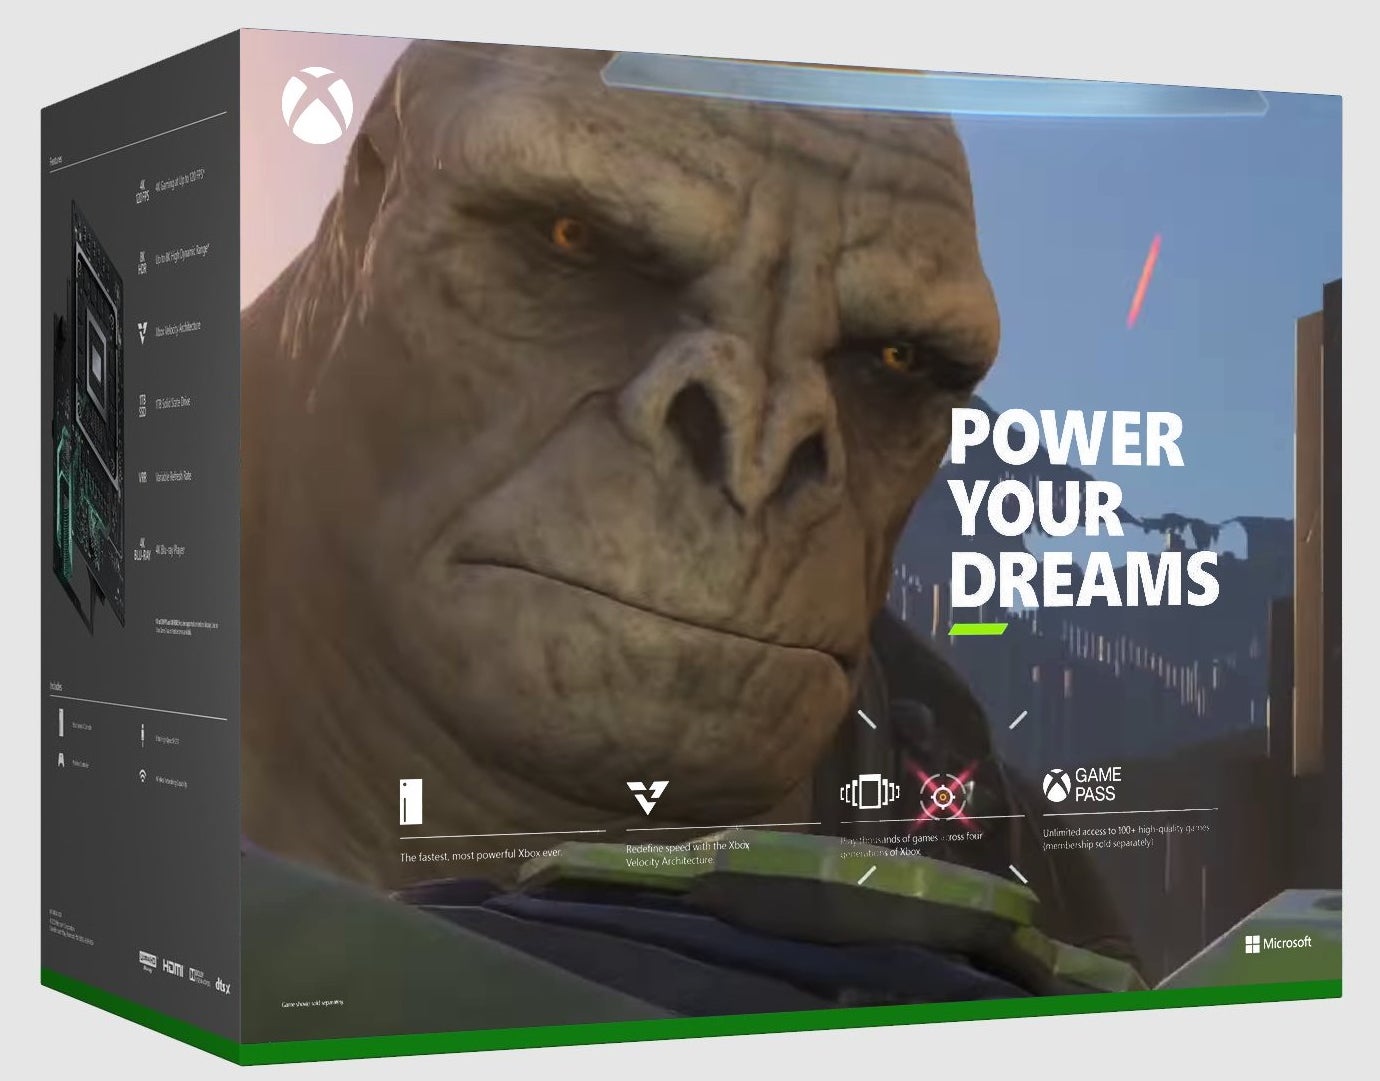 Image for The back of the Xbox Series X retail box prominently features Master Chief, so fans replaced him with Craig